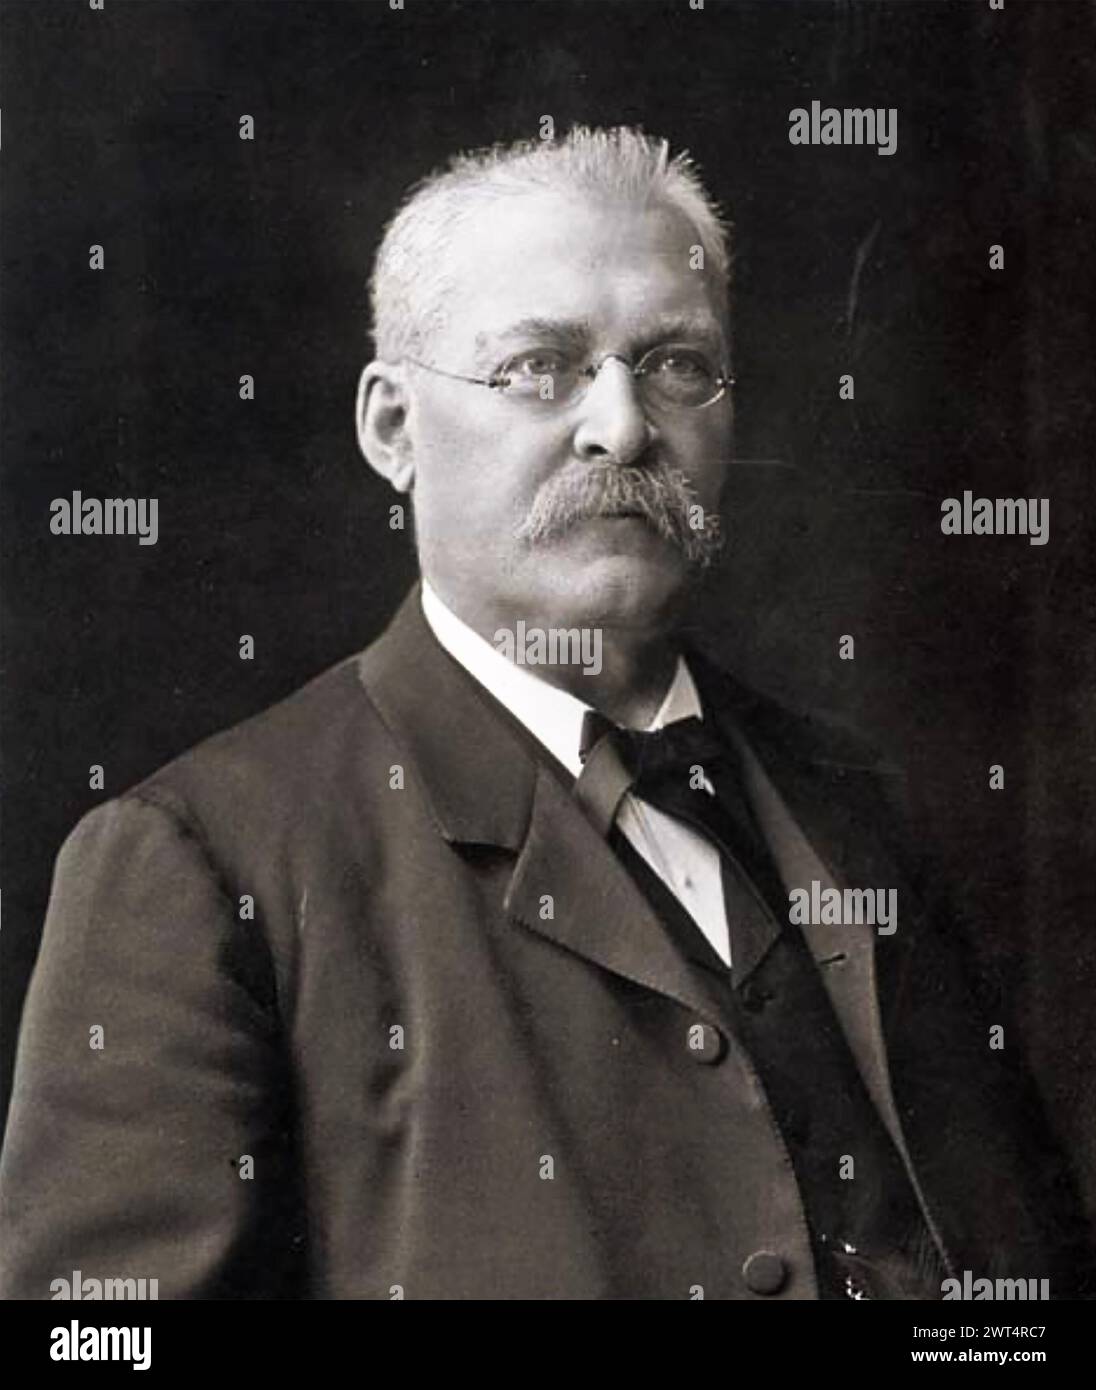 CHRISTIAN LUNDEBERG (1842-1911) as Prime Minister of Sweden in 1905 Stock Photo